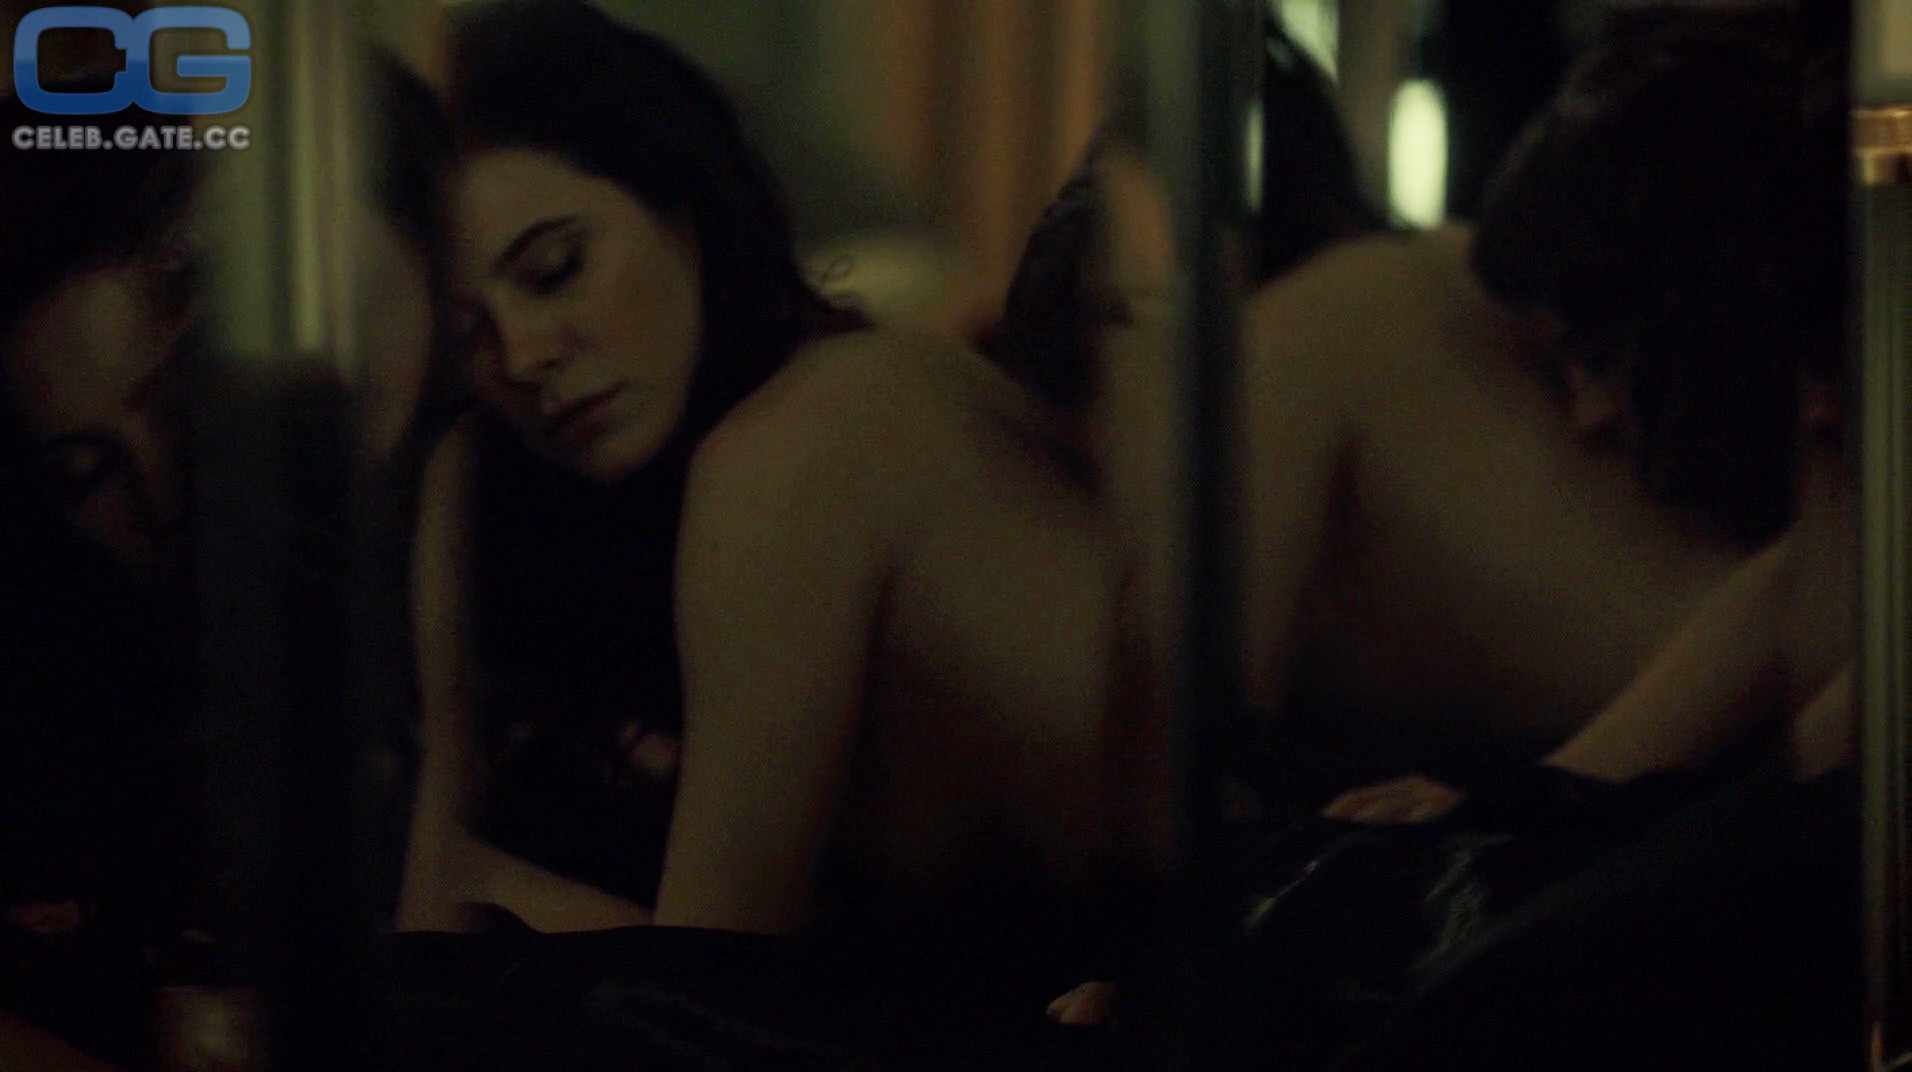 Katharine isabelle nude pictures